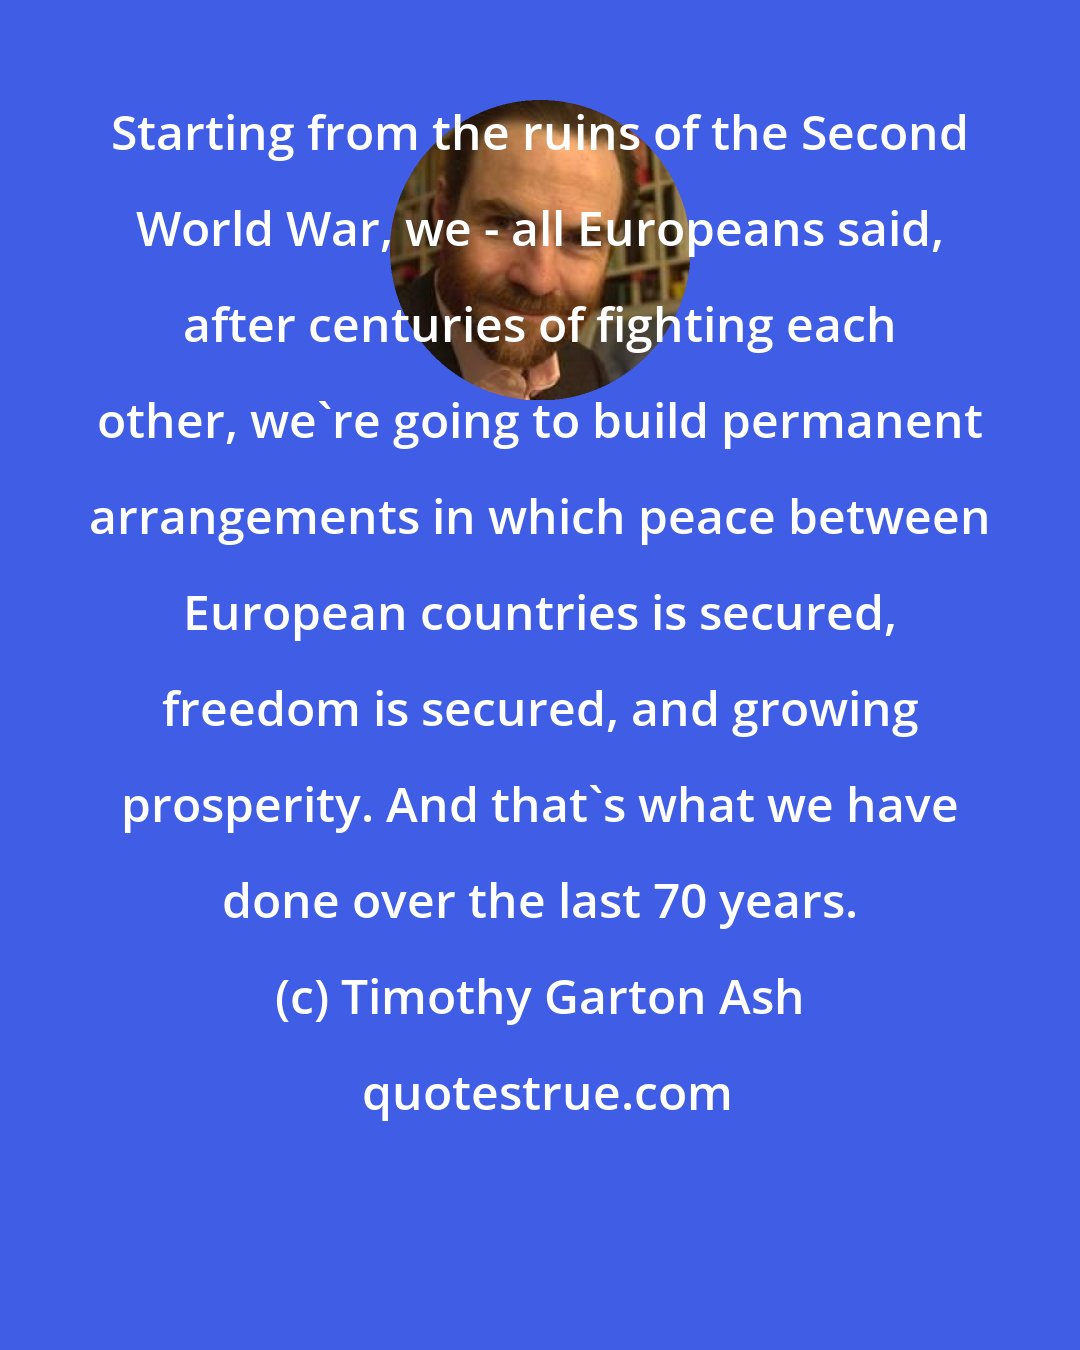 Timothy Garton Ash: Starting from the ruins of the Second World War, we - all Europeans said, after centuries of fighting each other, we're going to build permanent arrangements in which peace between European countries is secured, freedom is secured, and growing prosperity. And that's what we have done over the last 70 years.